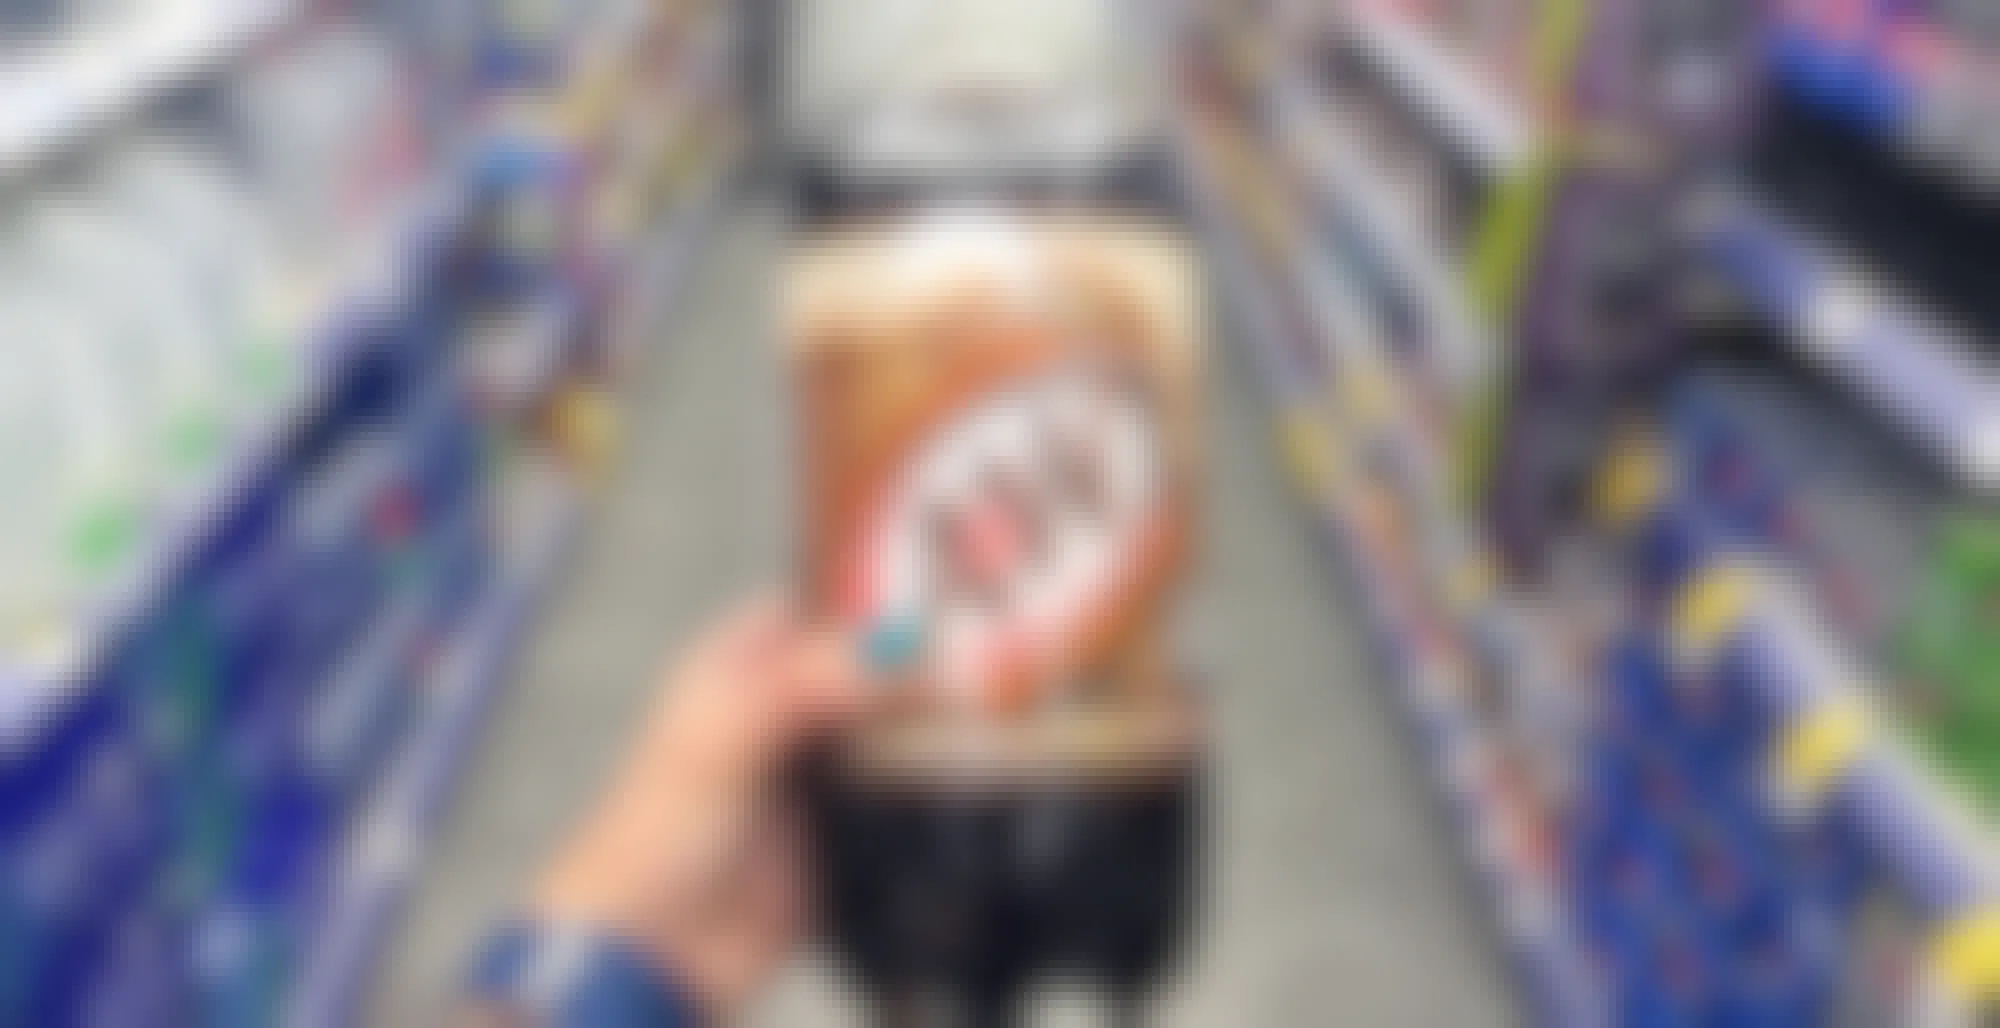 No Proof Needed to Get at Least $5.50 From the A&W Root Beer Settlement